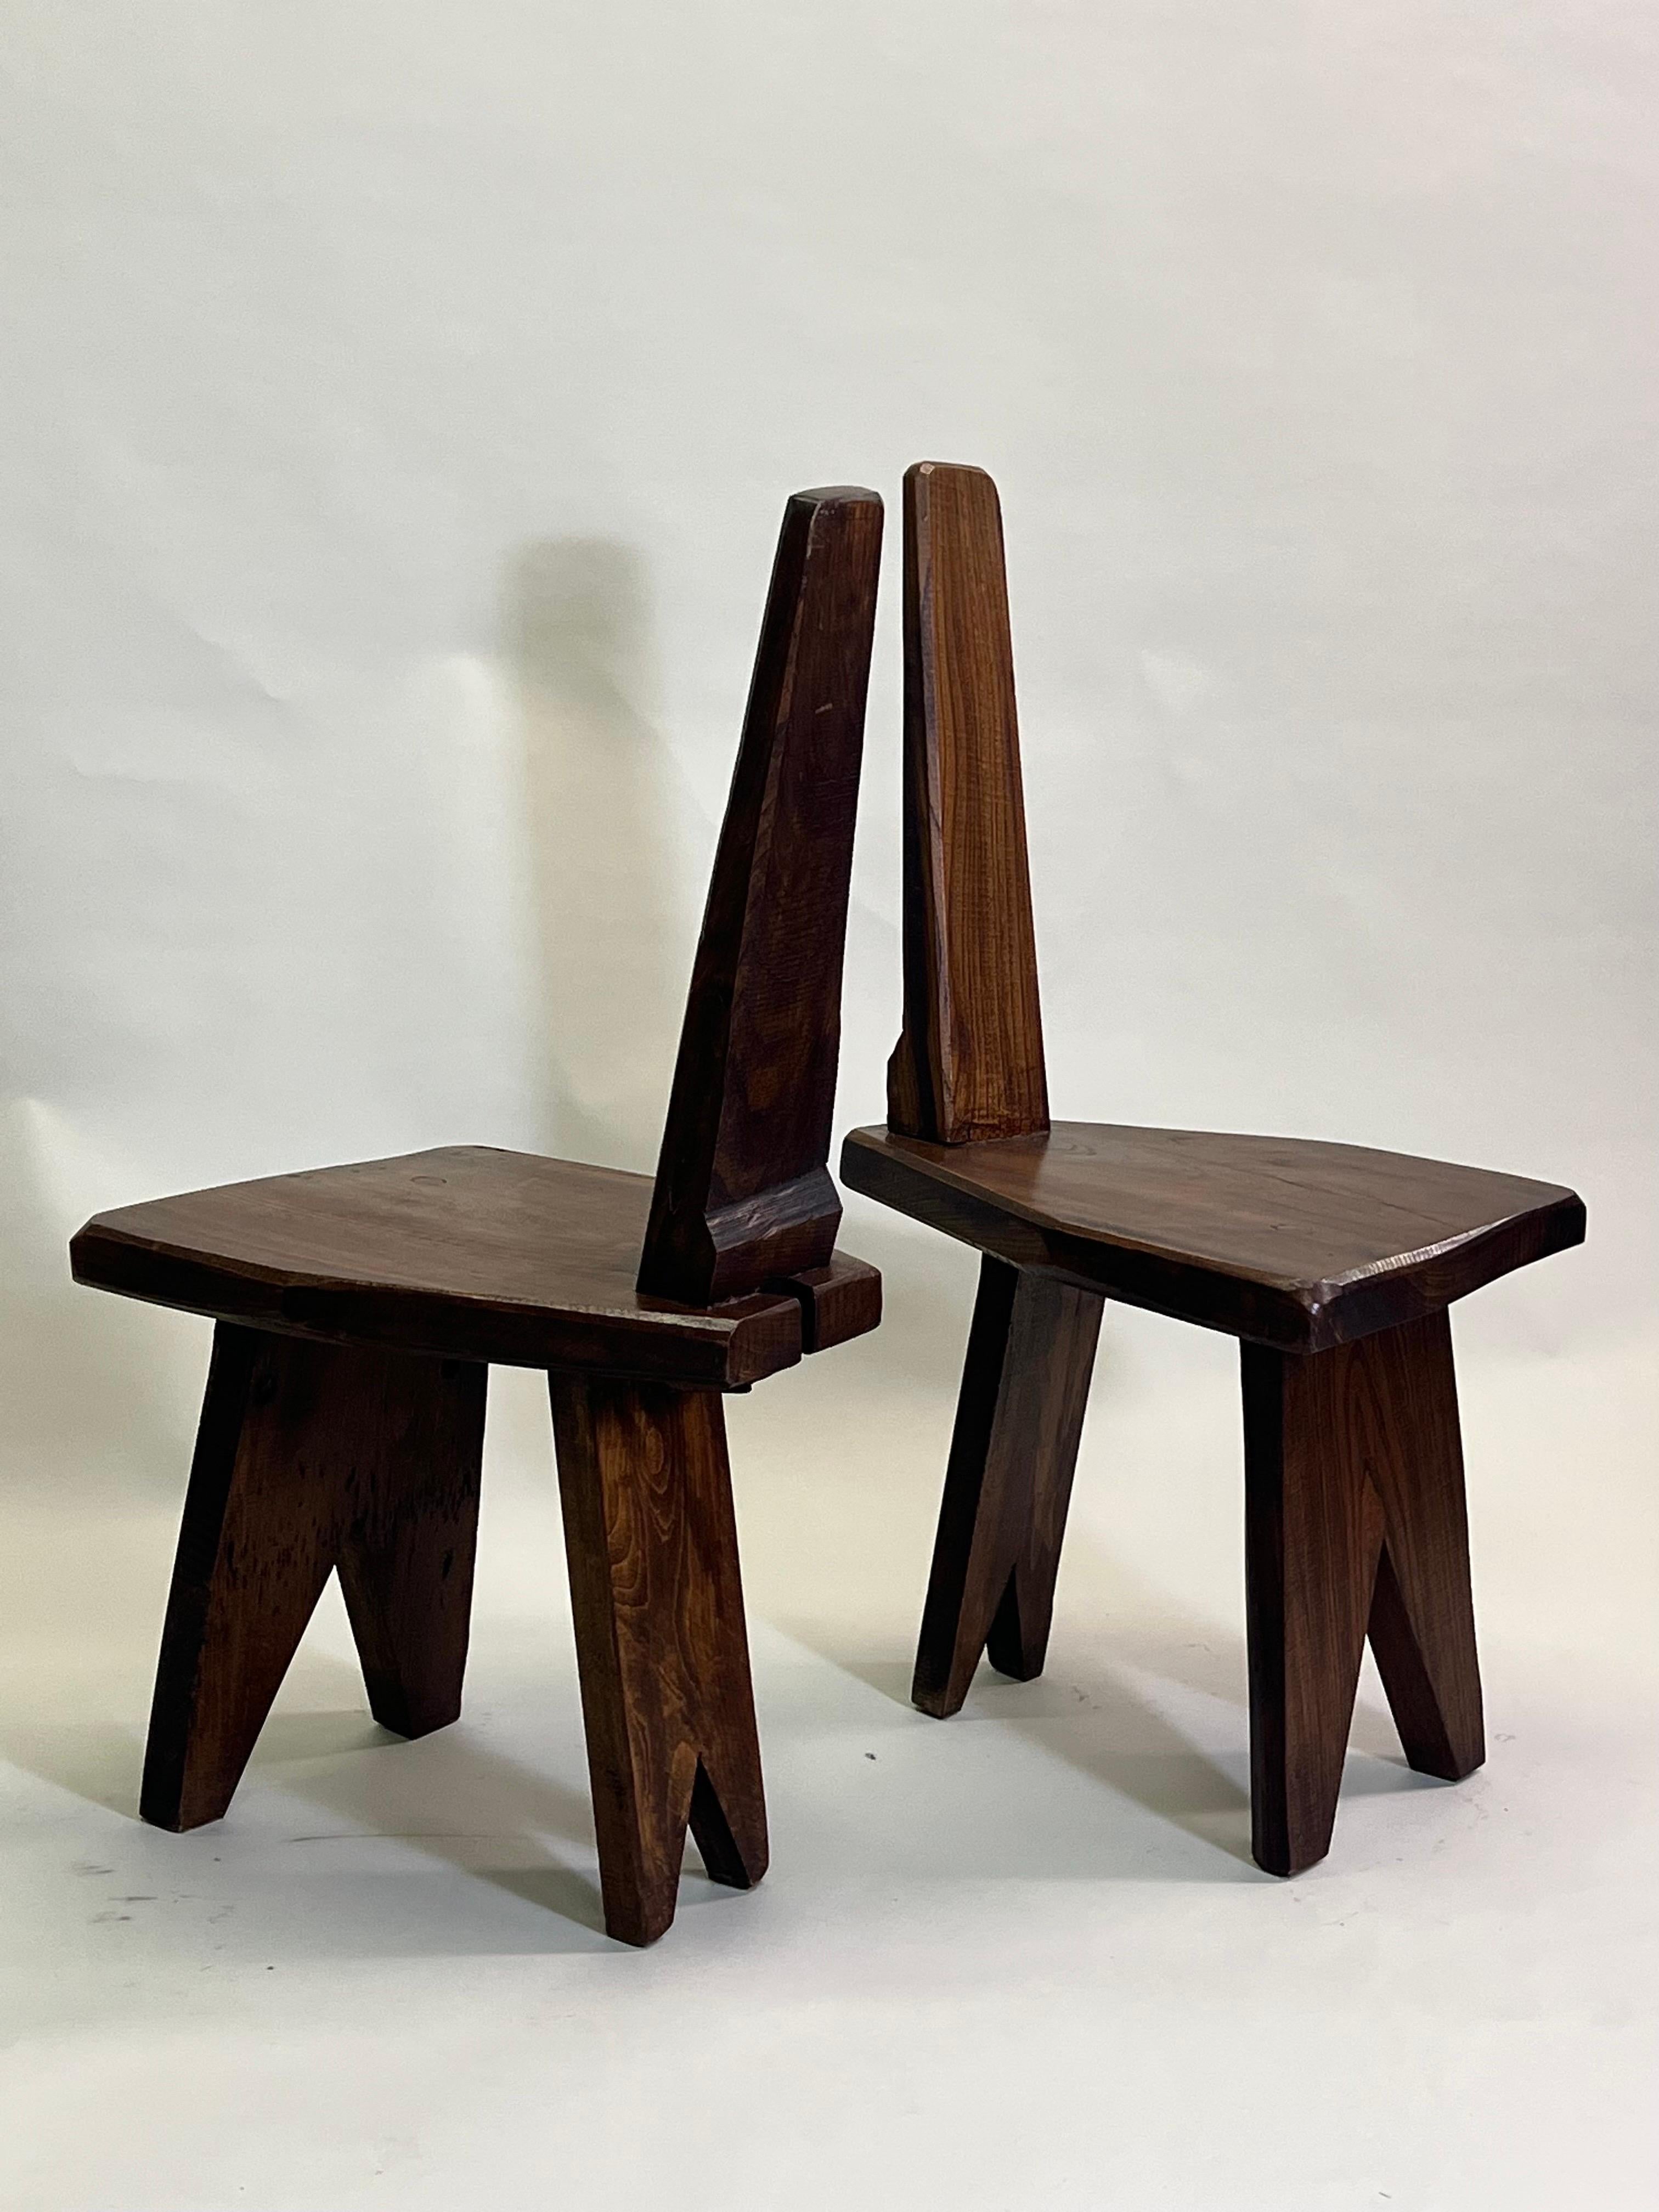 Stained Rare Pair of French Mid-Century Modern Craftsman Wood Chairs, Pierre Jeanneret For Sale